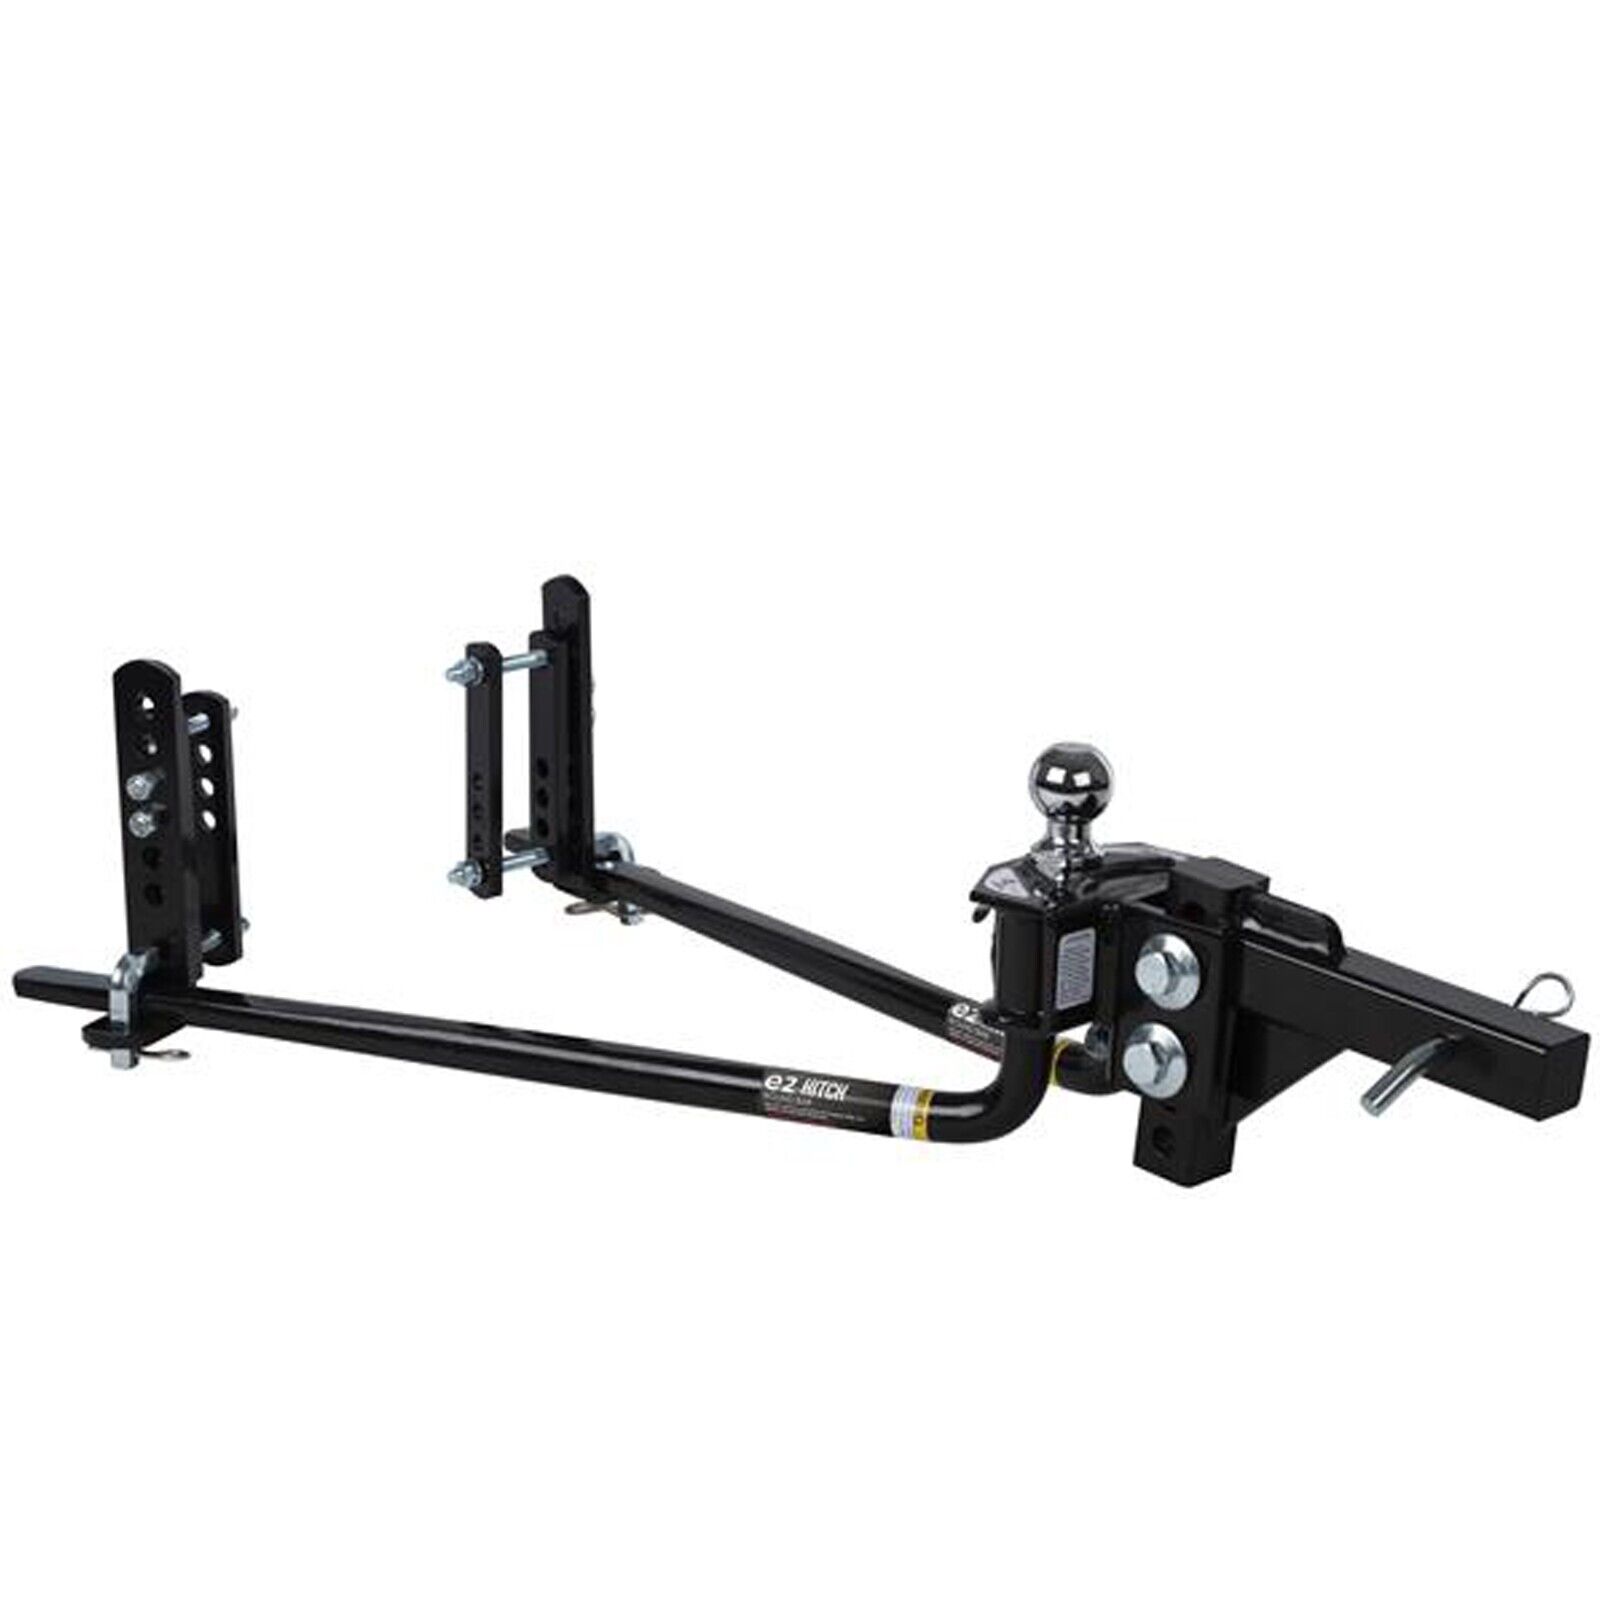 Fastway Trailer Products 94-00-0600 e2 600lb Tongue Weight Distribution Hitch